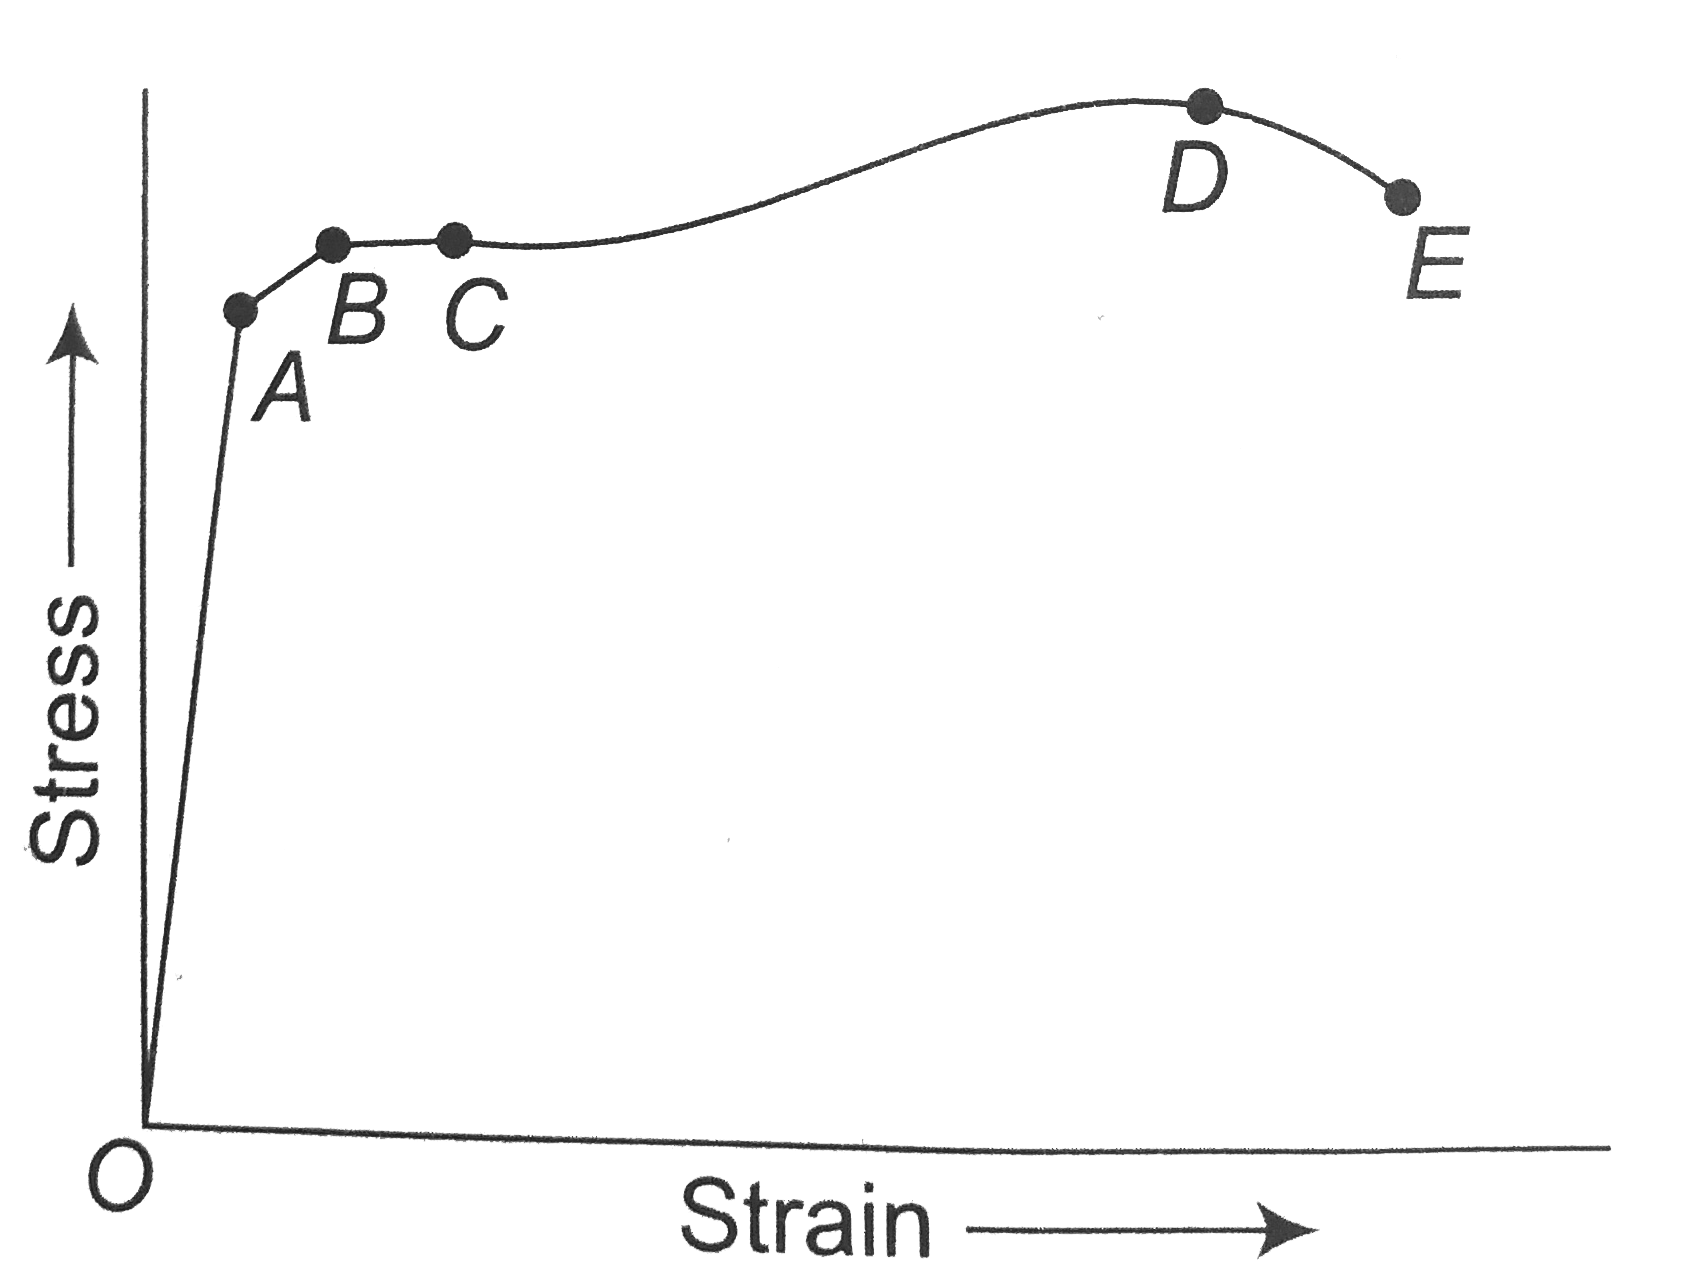 The stress strain graph for a metal wire is as shown in the figure. In the graph, the region in which Hooke's law is obeyed, the ultimate strength and fracture are represented by